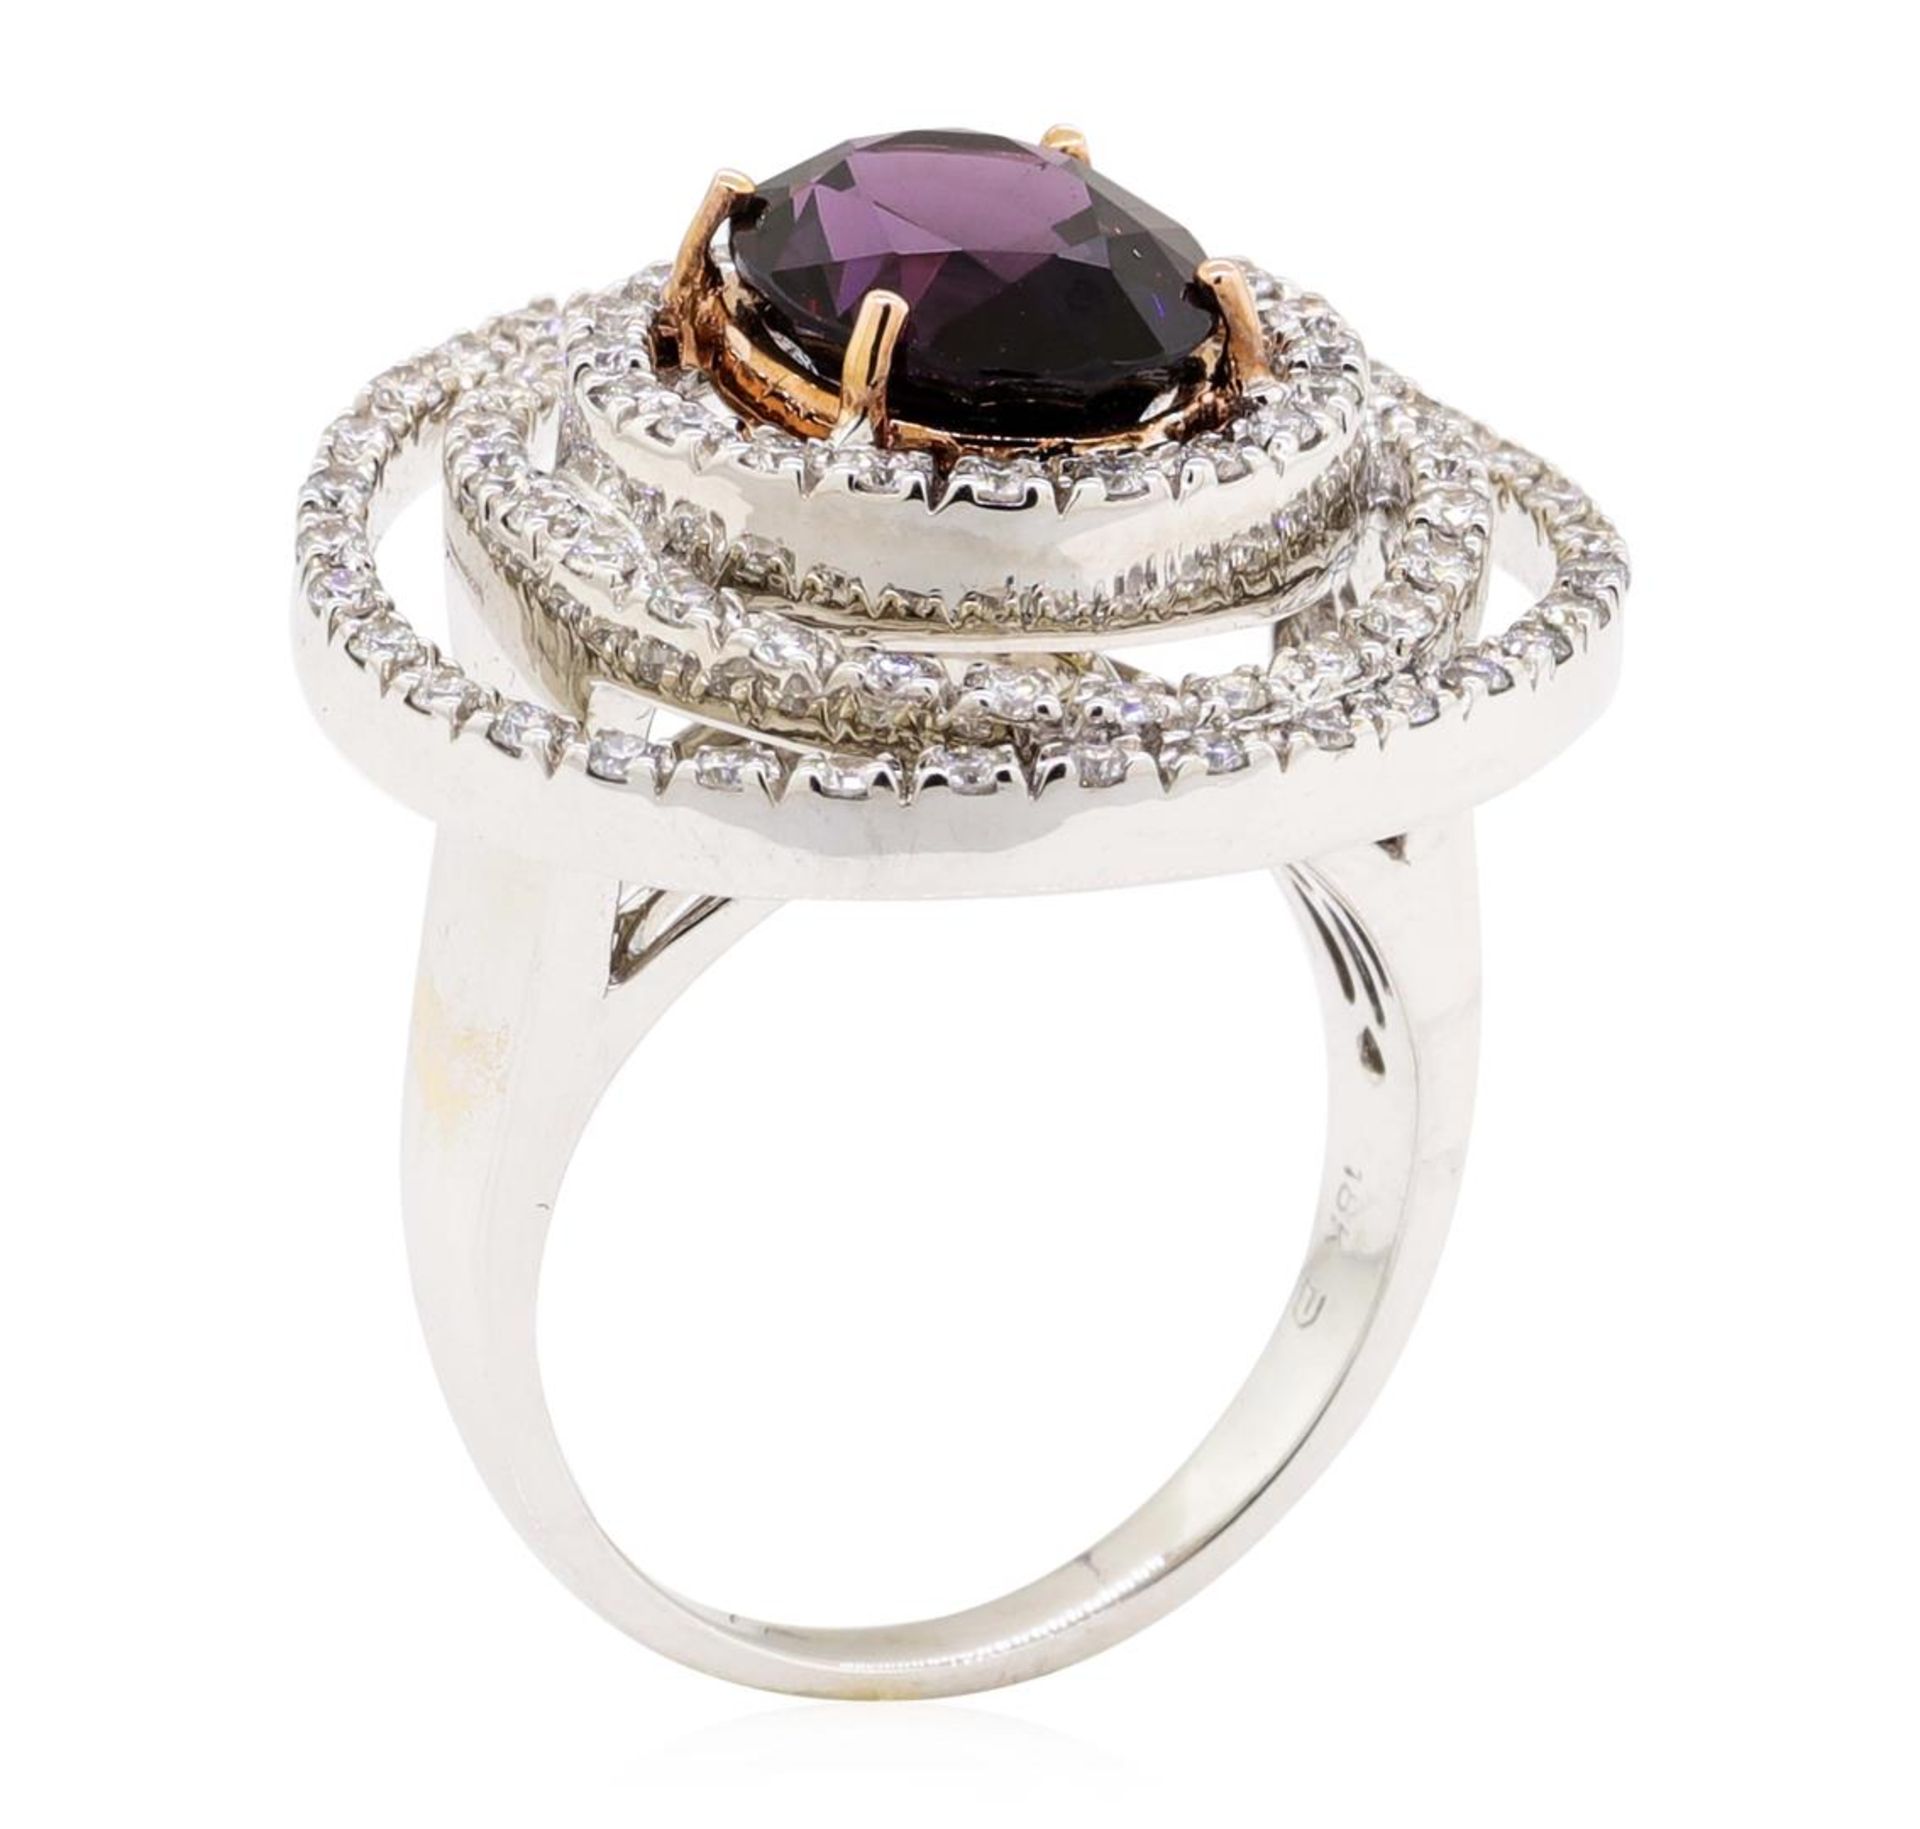 4.92 ctw Oval Mixed Lavender Spinel And Round Brilliant Cut Diamond Ring - 18KT - Image 4 of 5